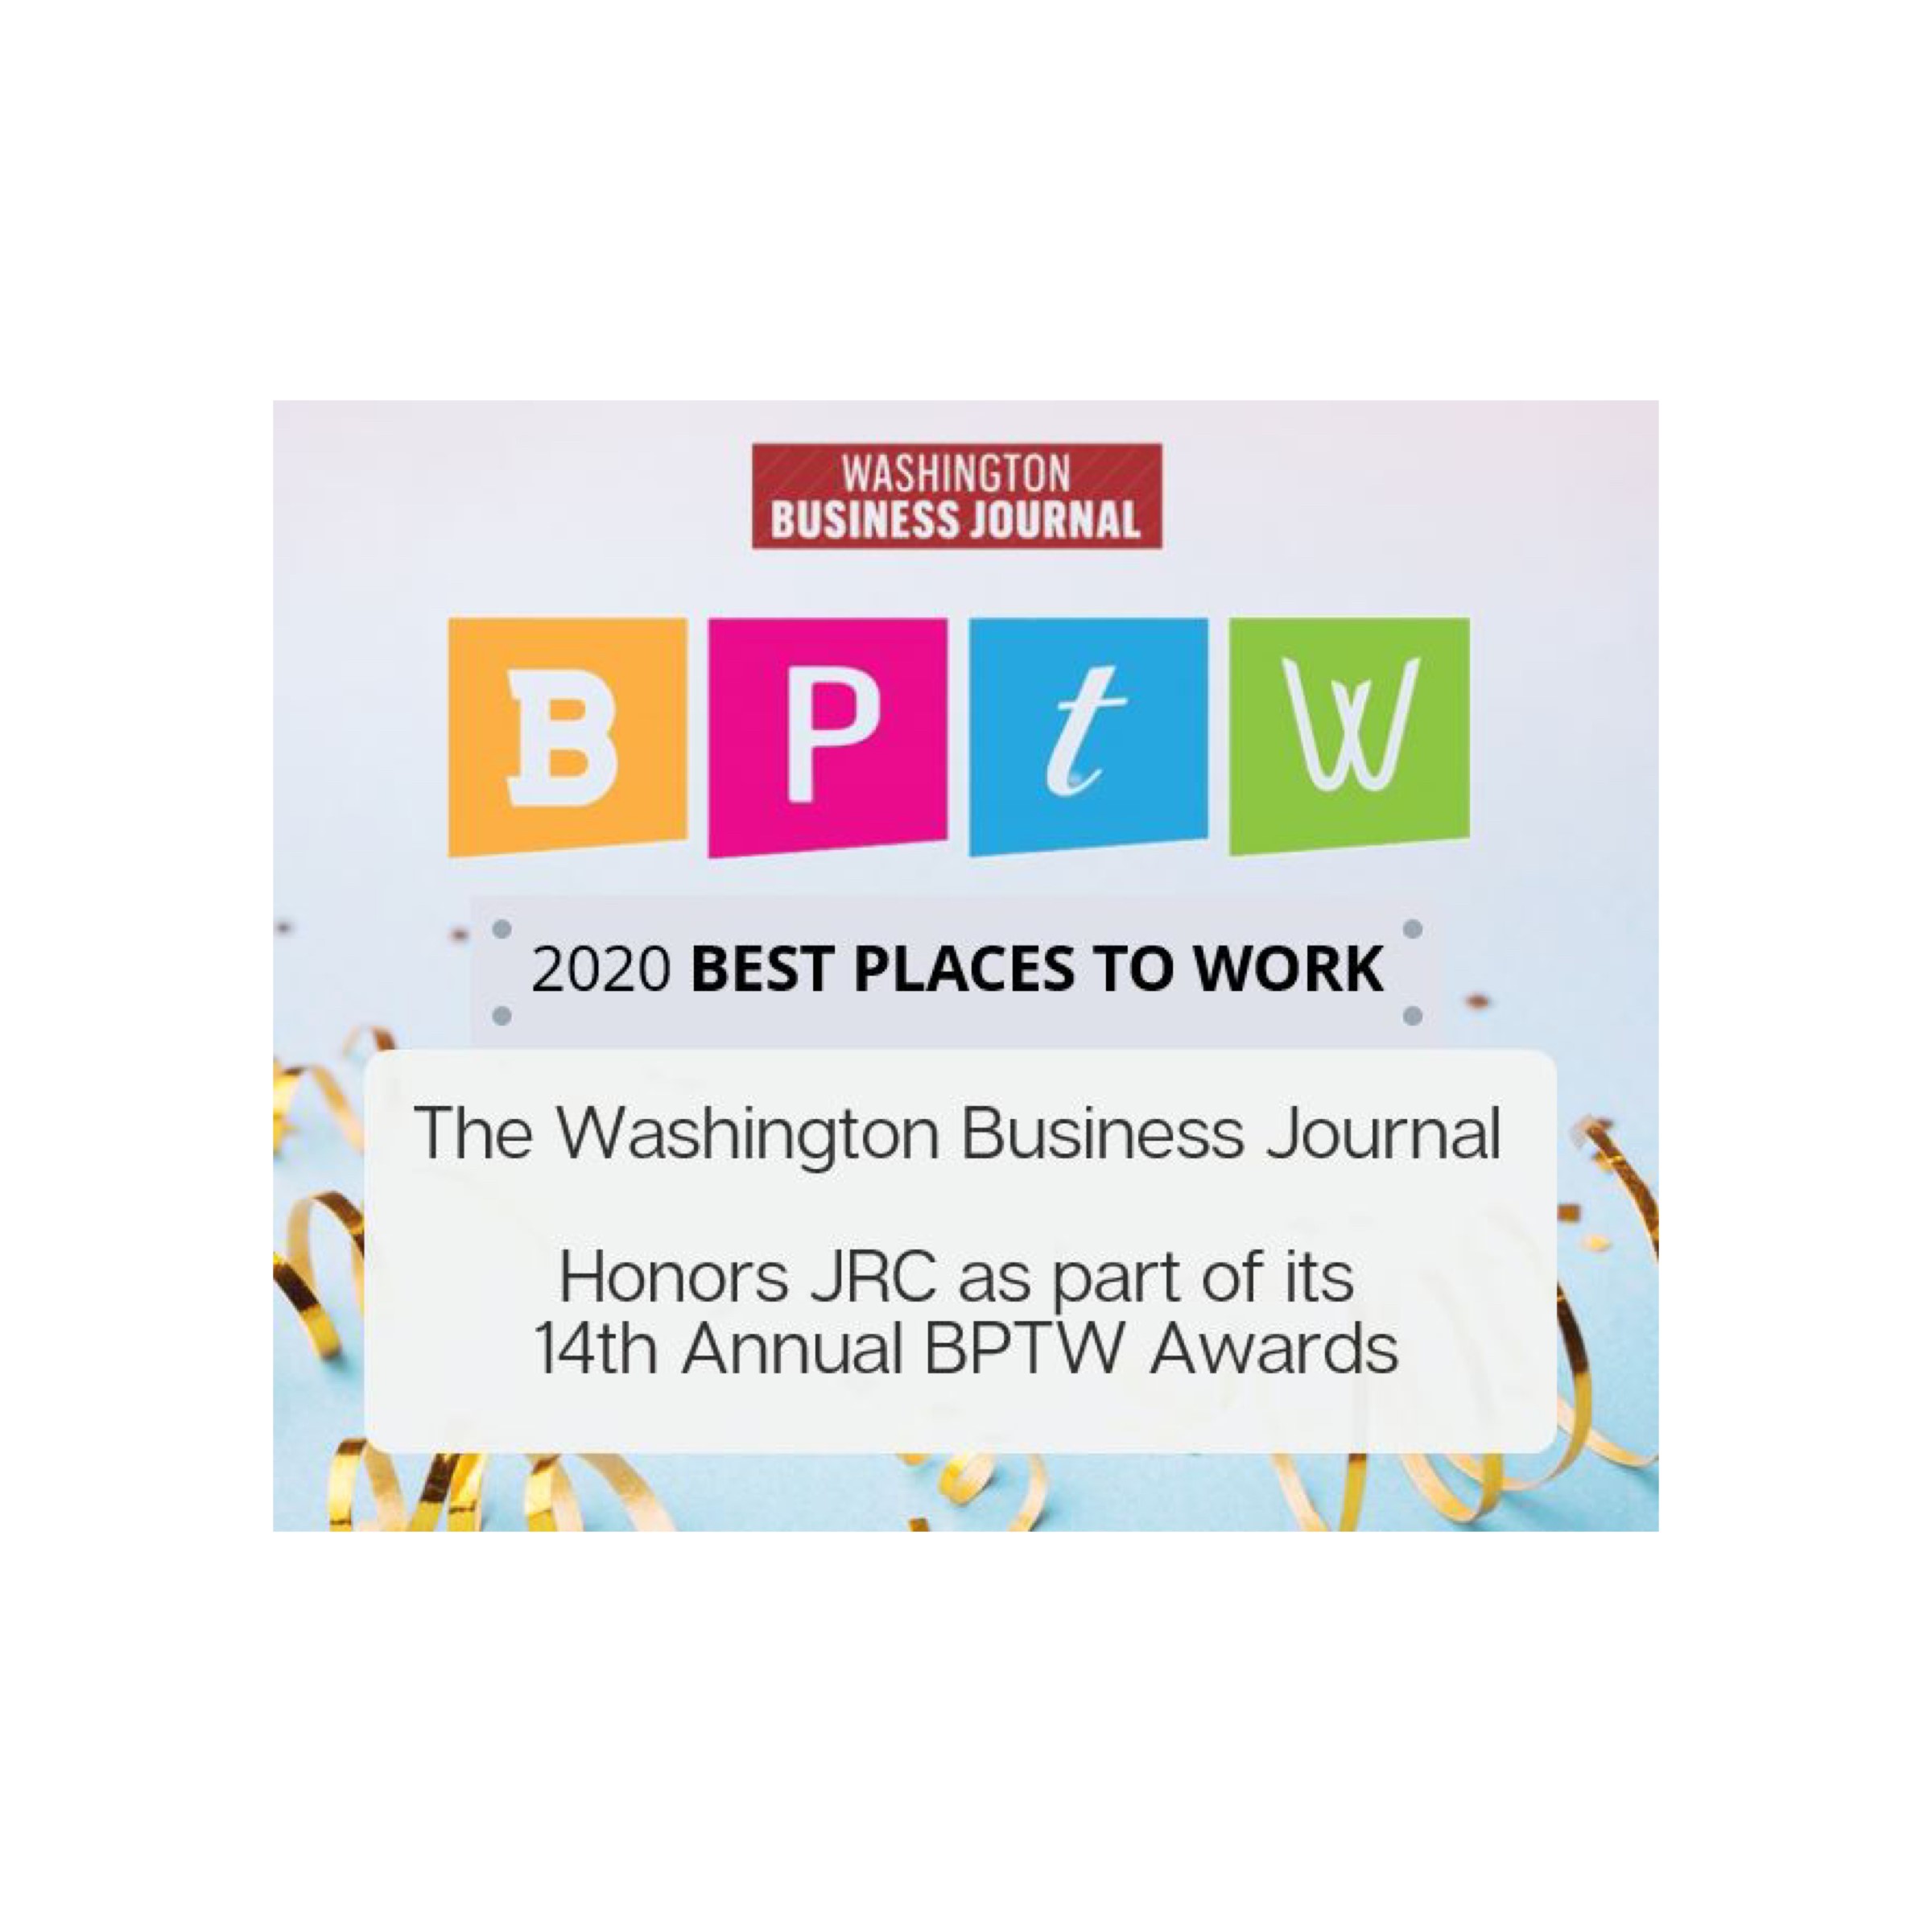 The Washington Business Journal Honors JRC as Part of the 14th Annual Best Places to Work Awards